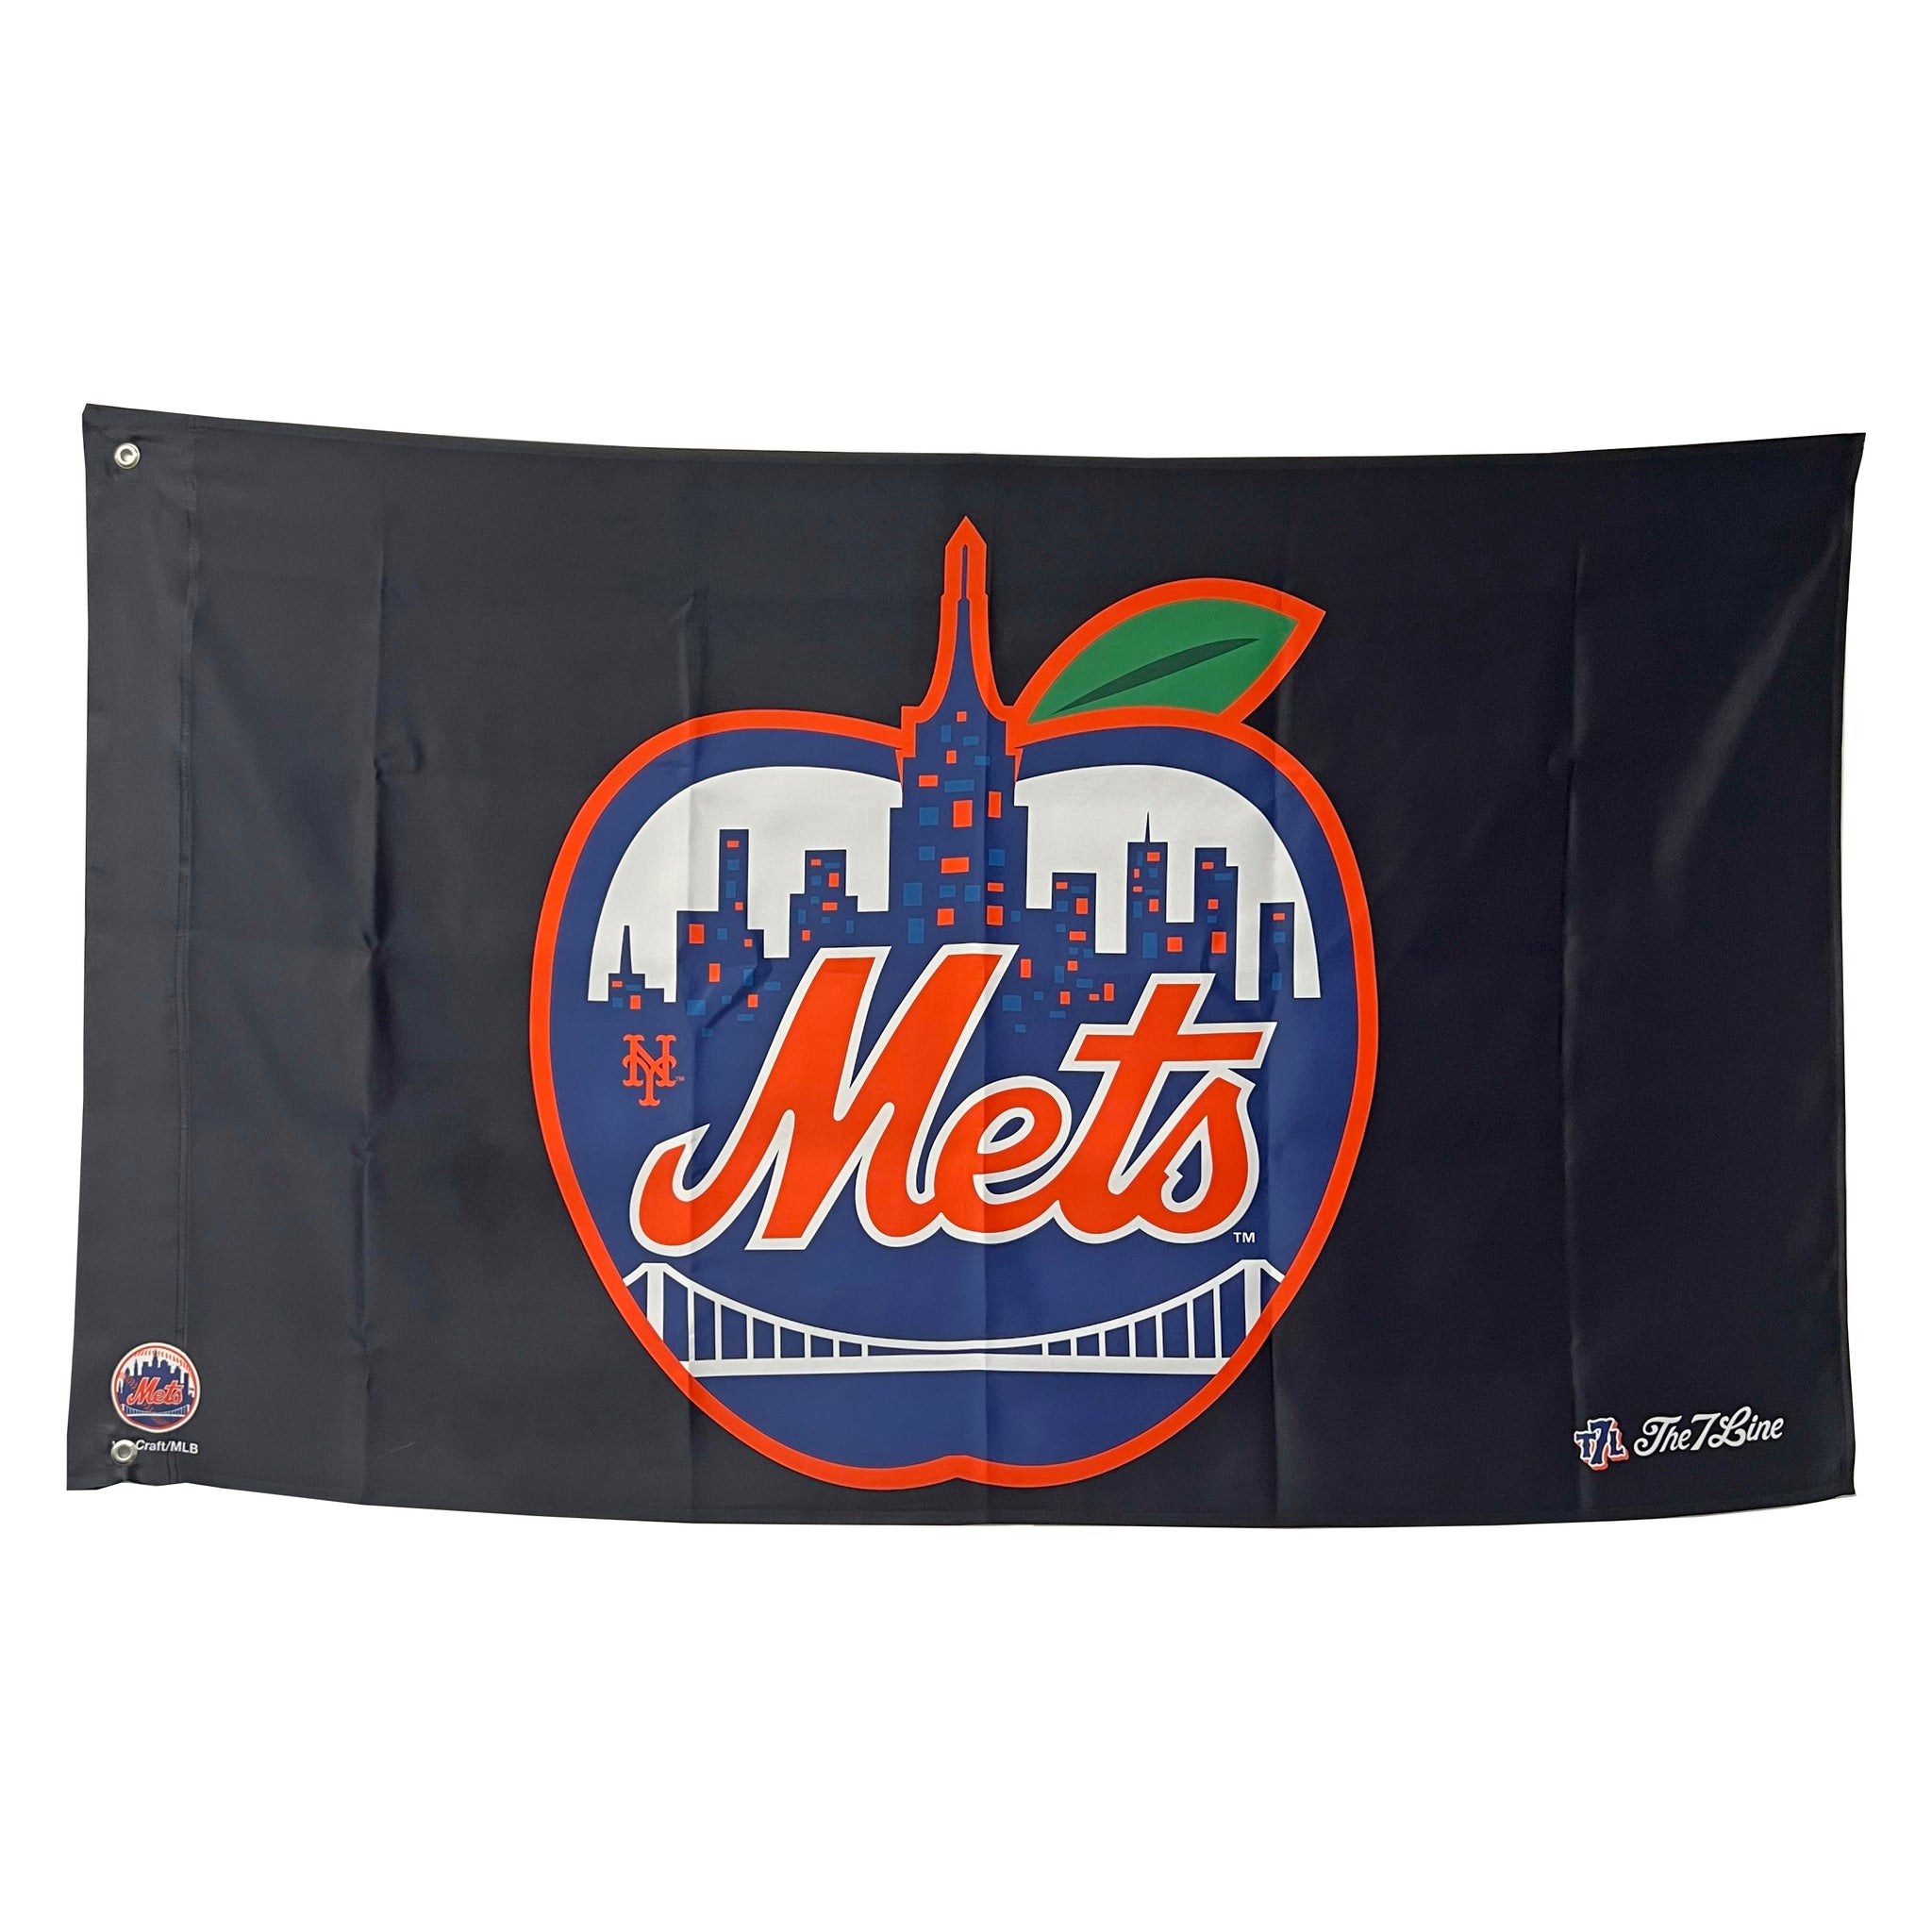 Mets Team Store on X: Gear up for the 2022 season with a new